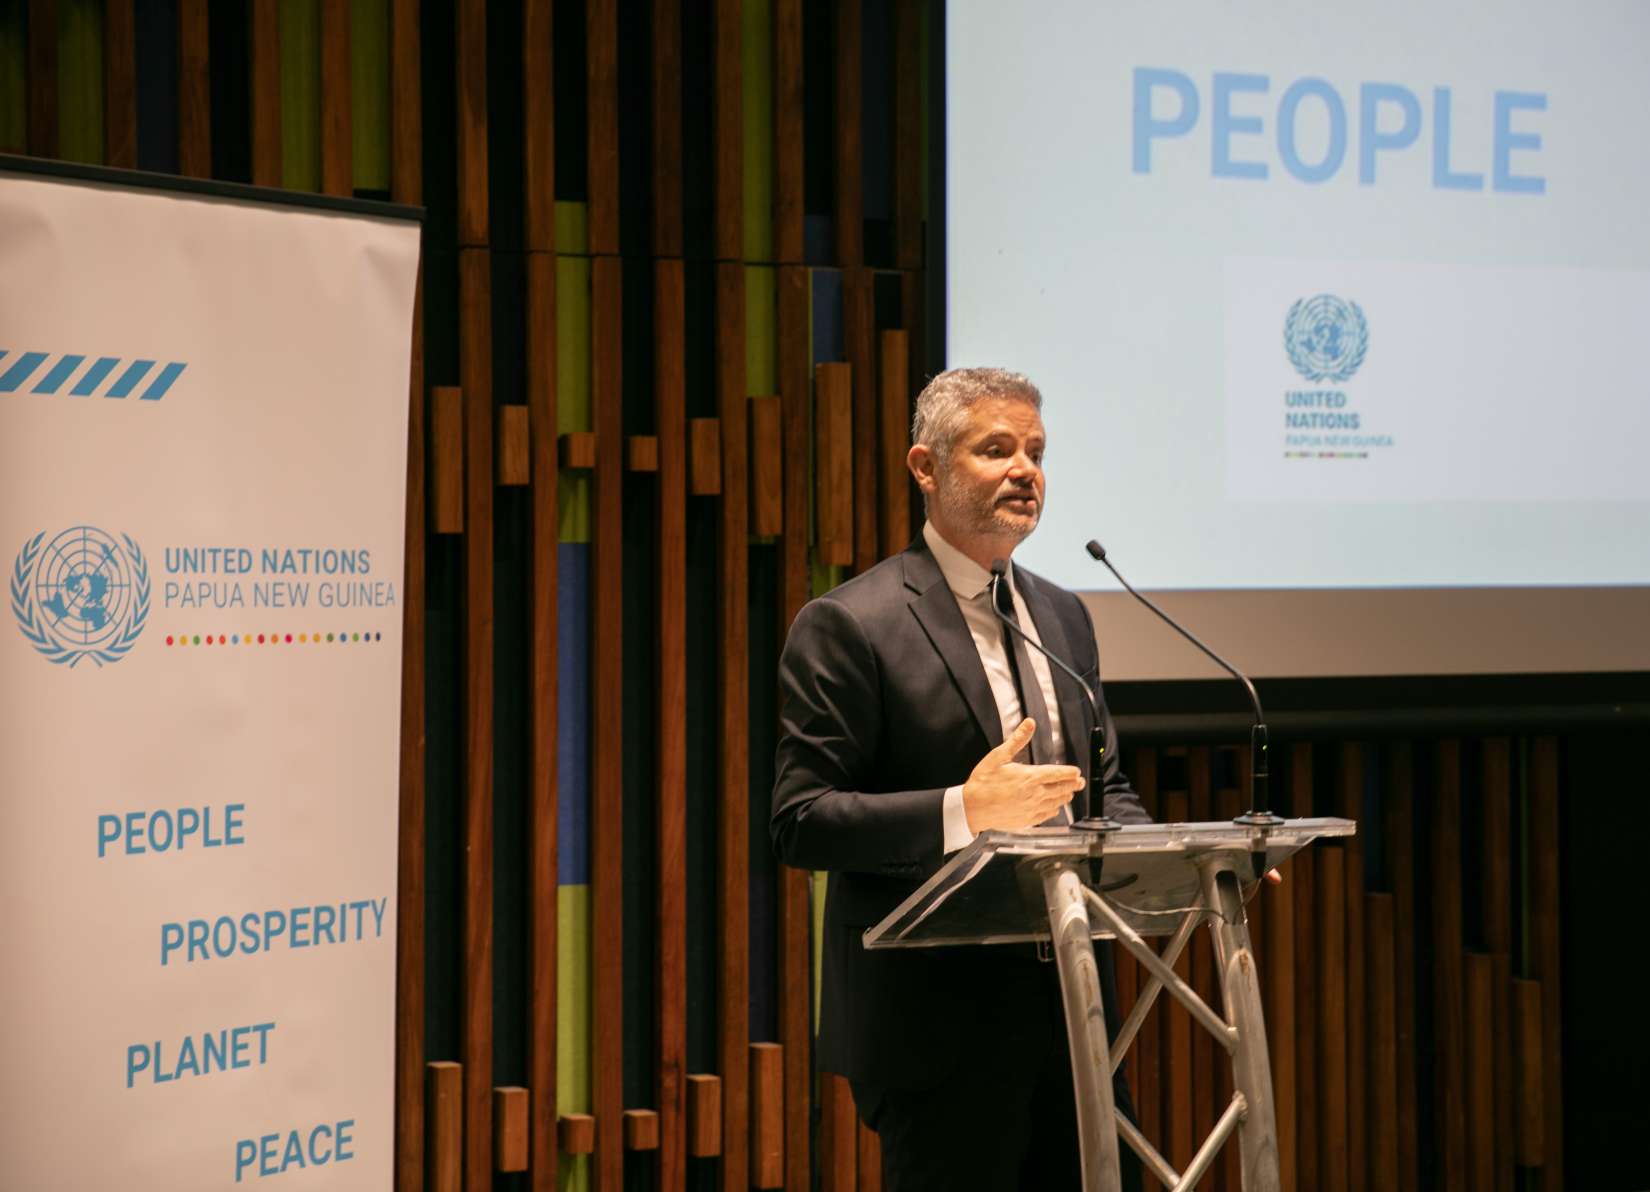 Richard Howard, United Nations Resident Coordinator in Papua New Guinea 